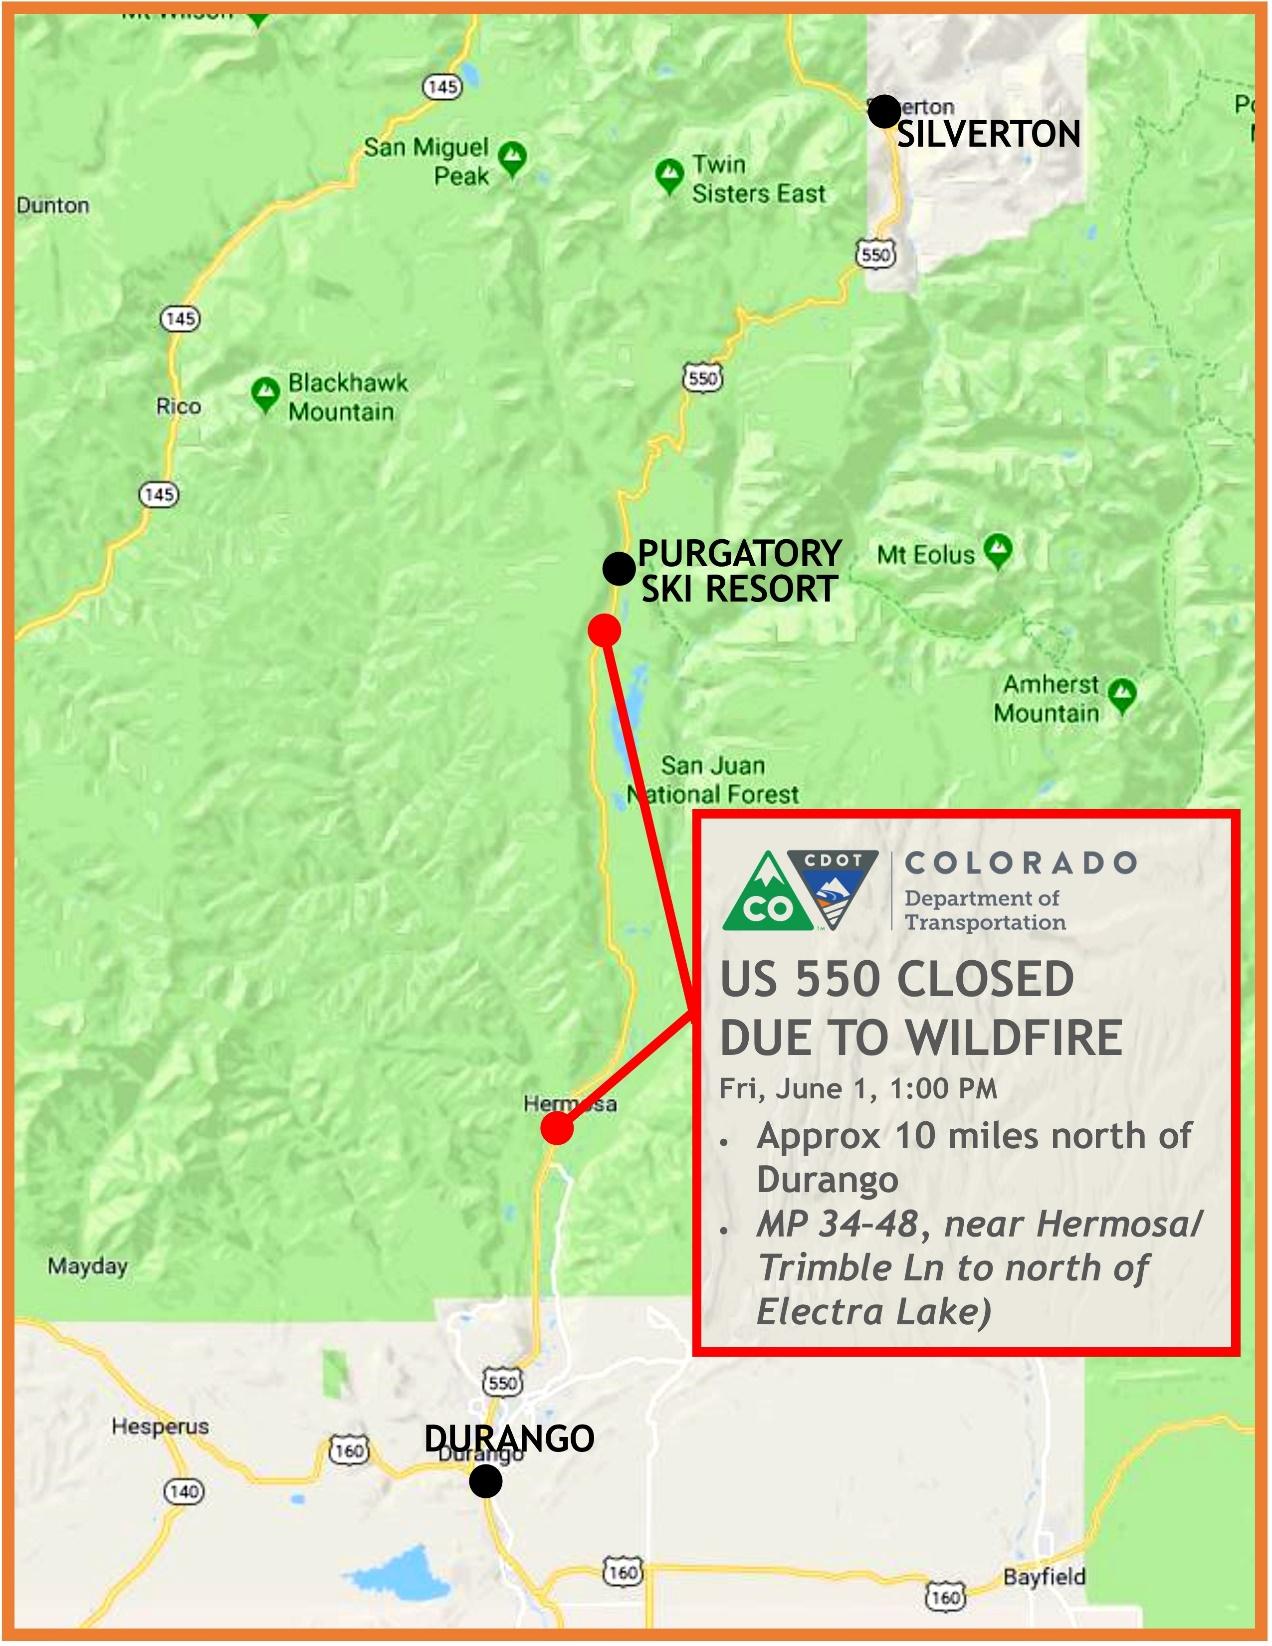 US 550 Closed due to Wildfire detail image